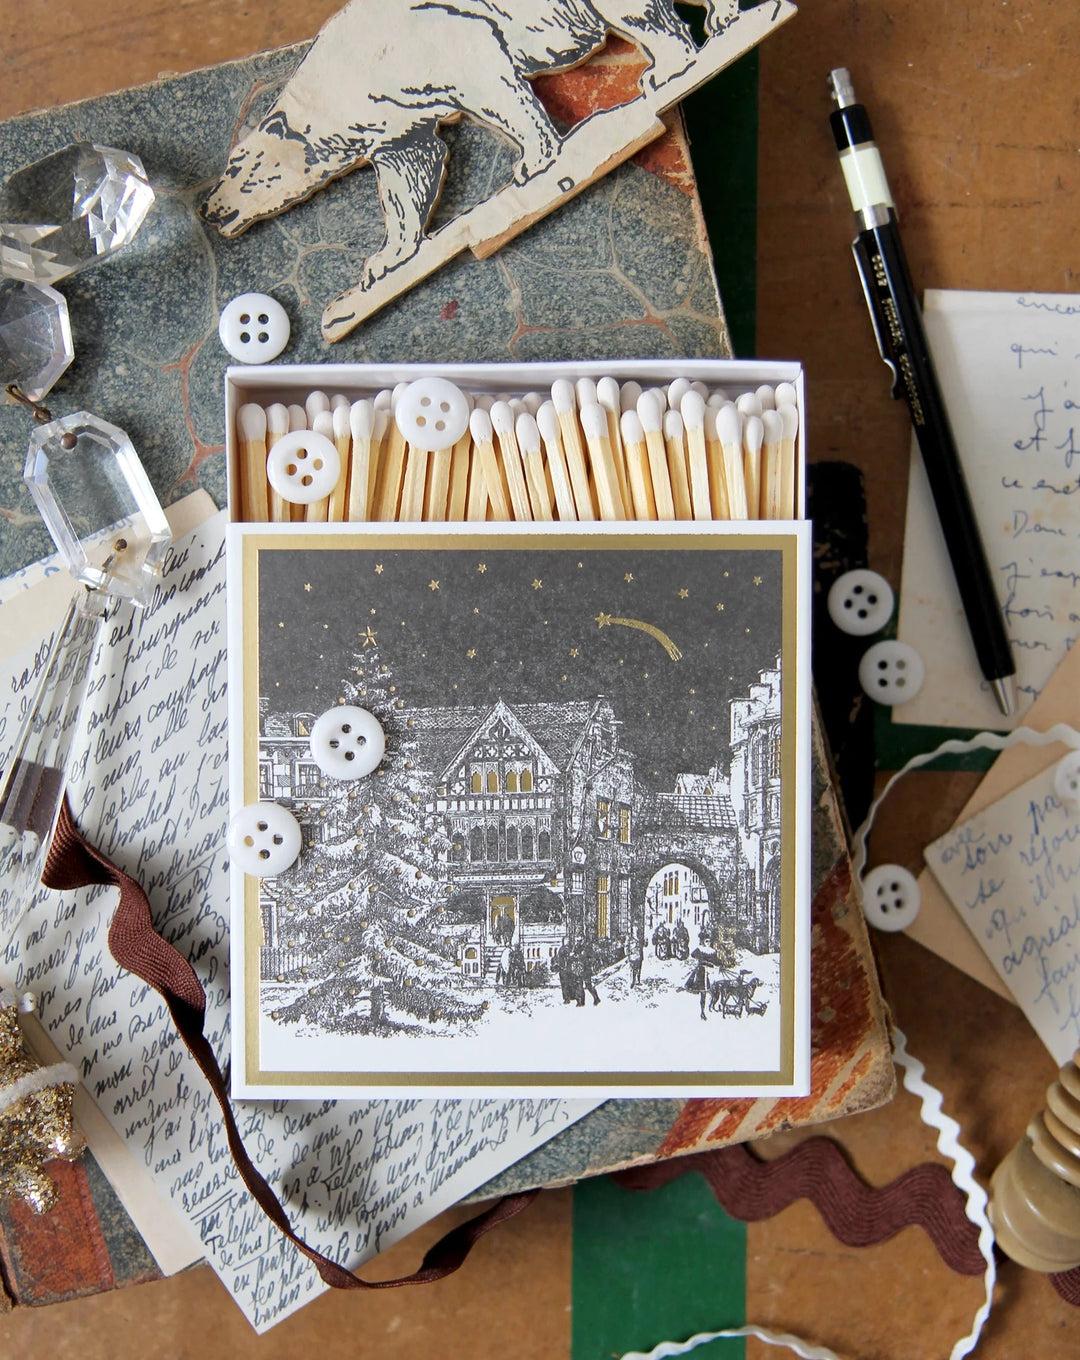 luxury matches featuring a starry night Christmas scene, pictured on a vintage suitcase with buttons and decorations